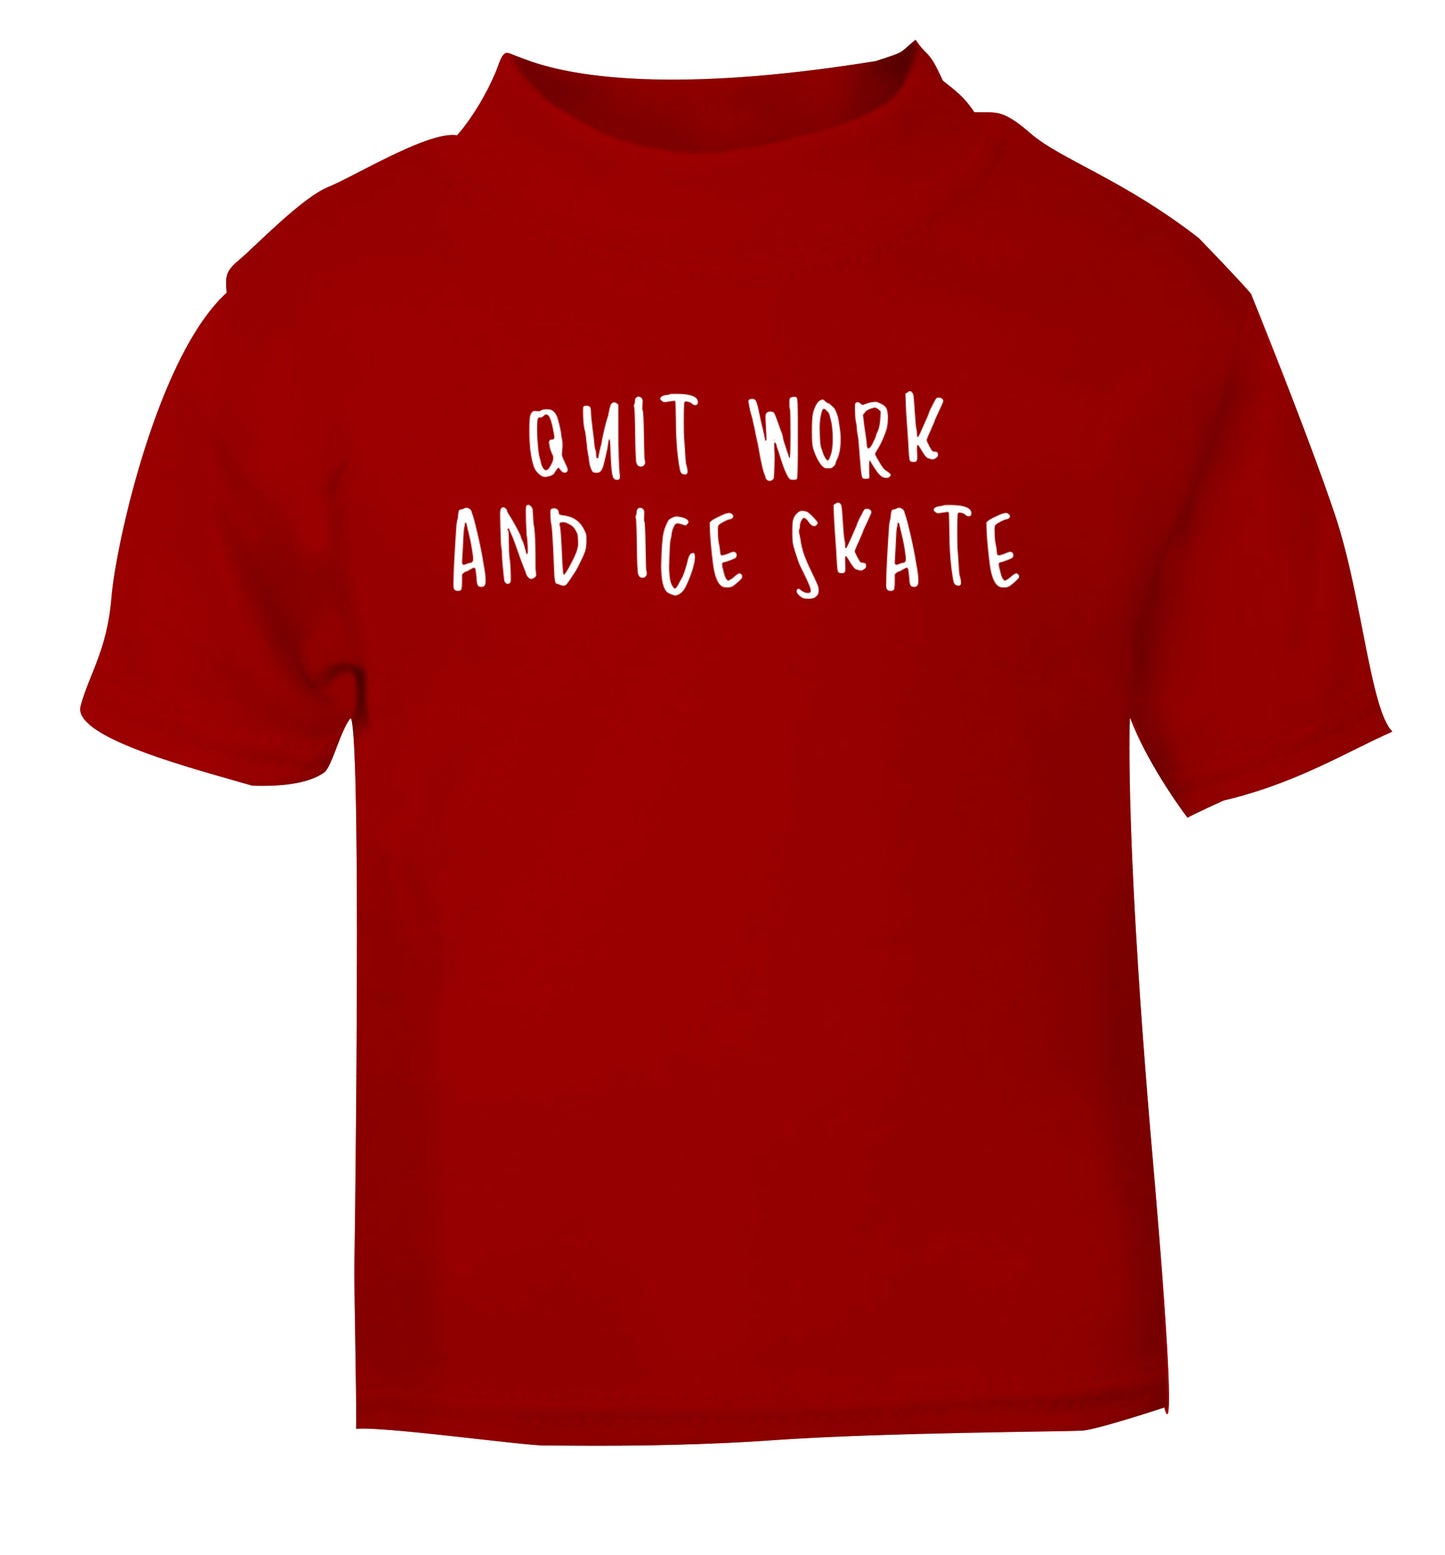 Quit work ice skate red Baby Toddler Tshirt 2 Years